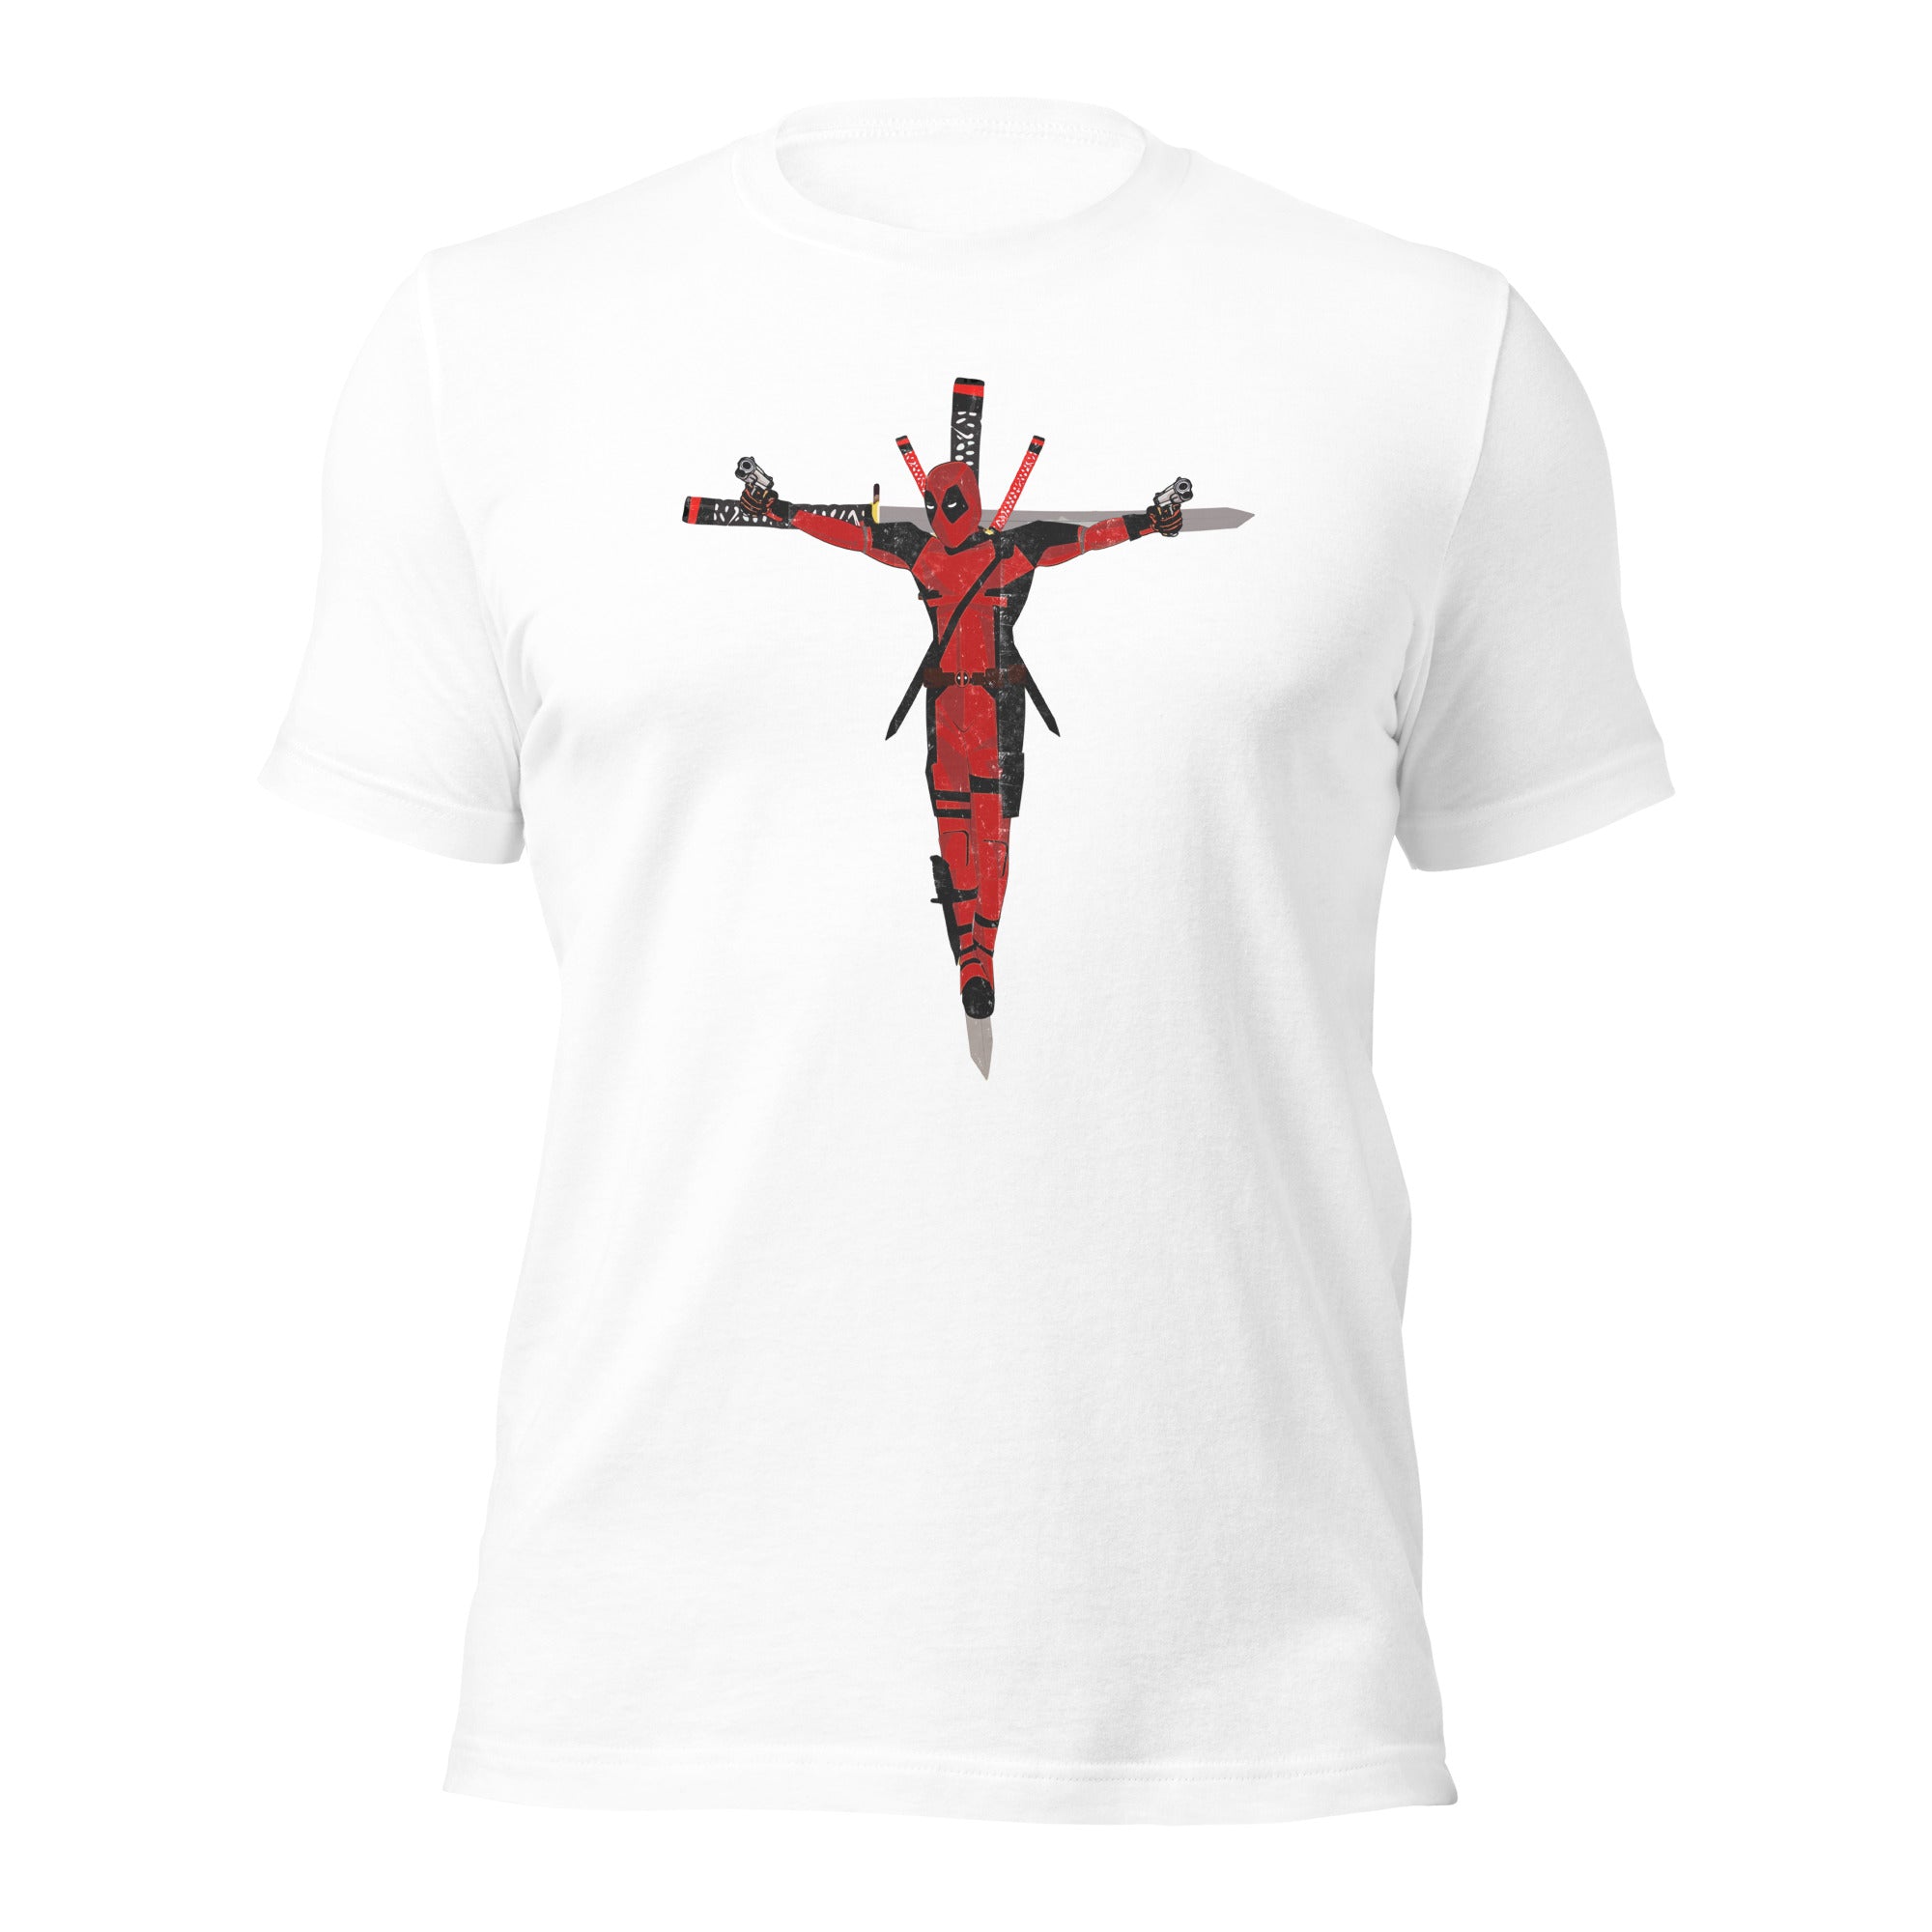 a t - shirt with a cross painted on it